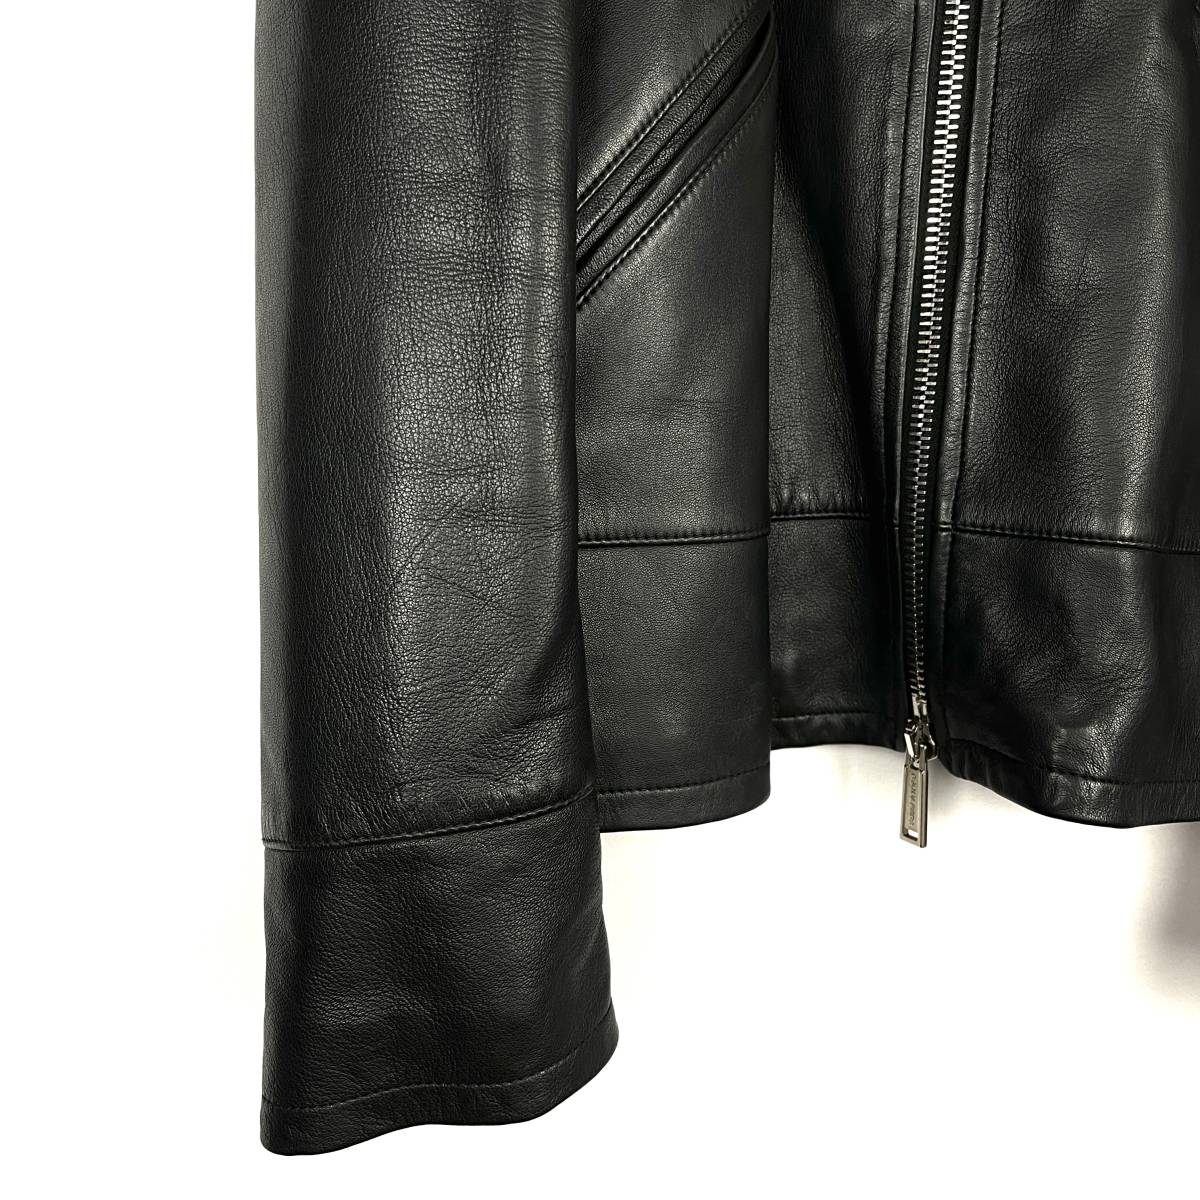 DSQUARED2(ディースクエアード) leather riders jacket 18SS (black)_画像3